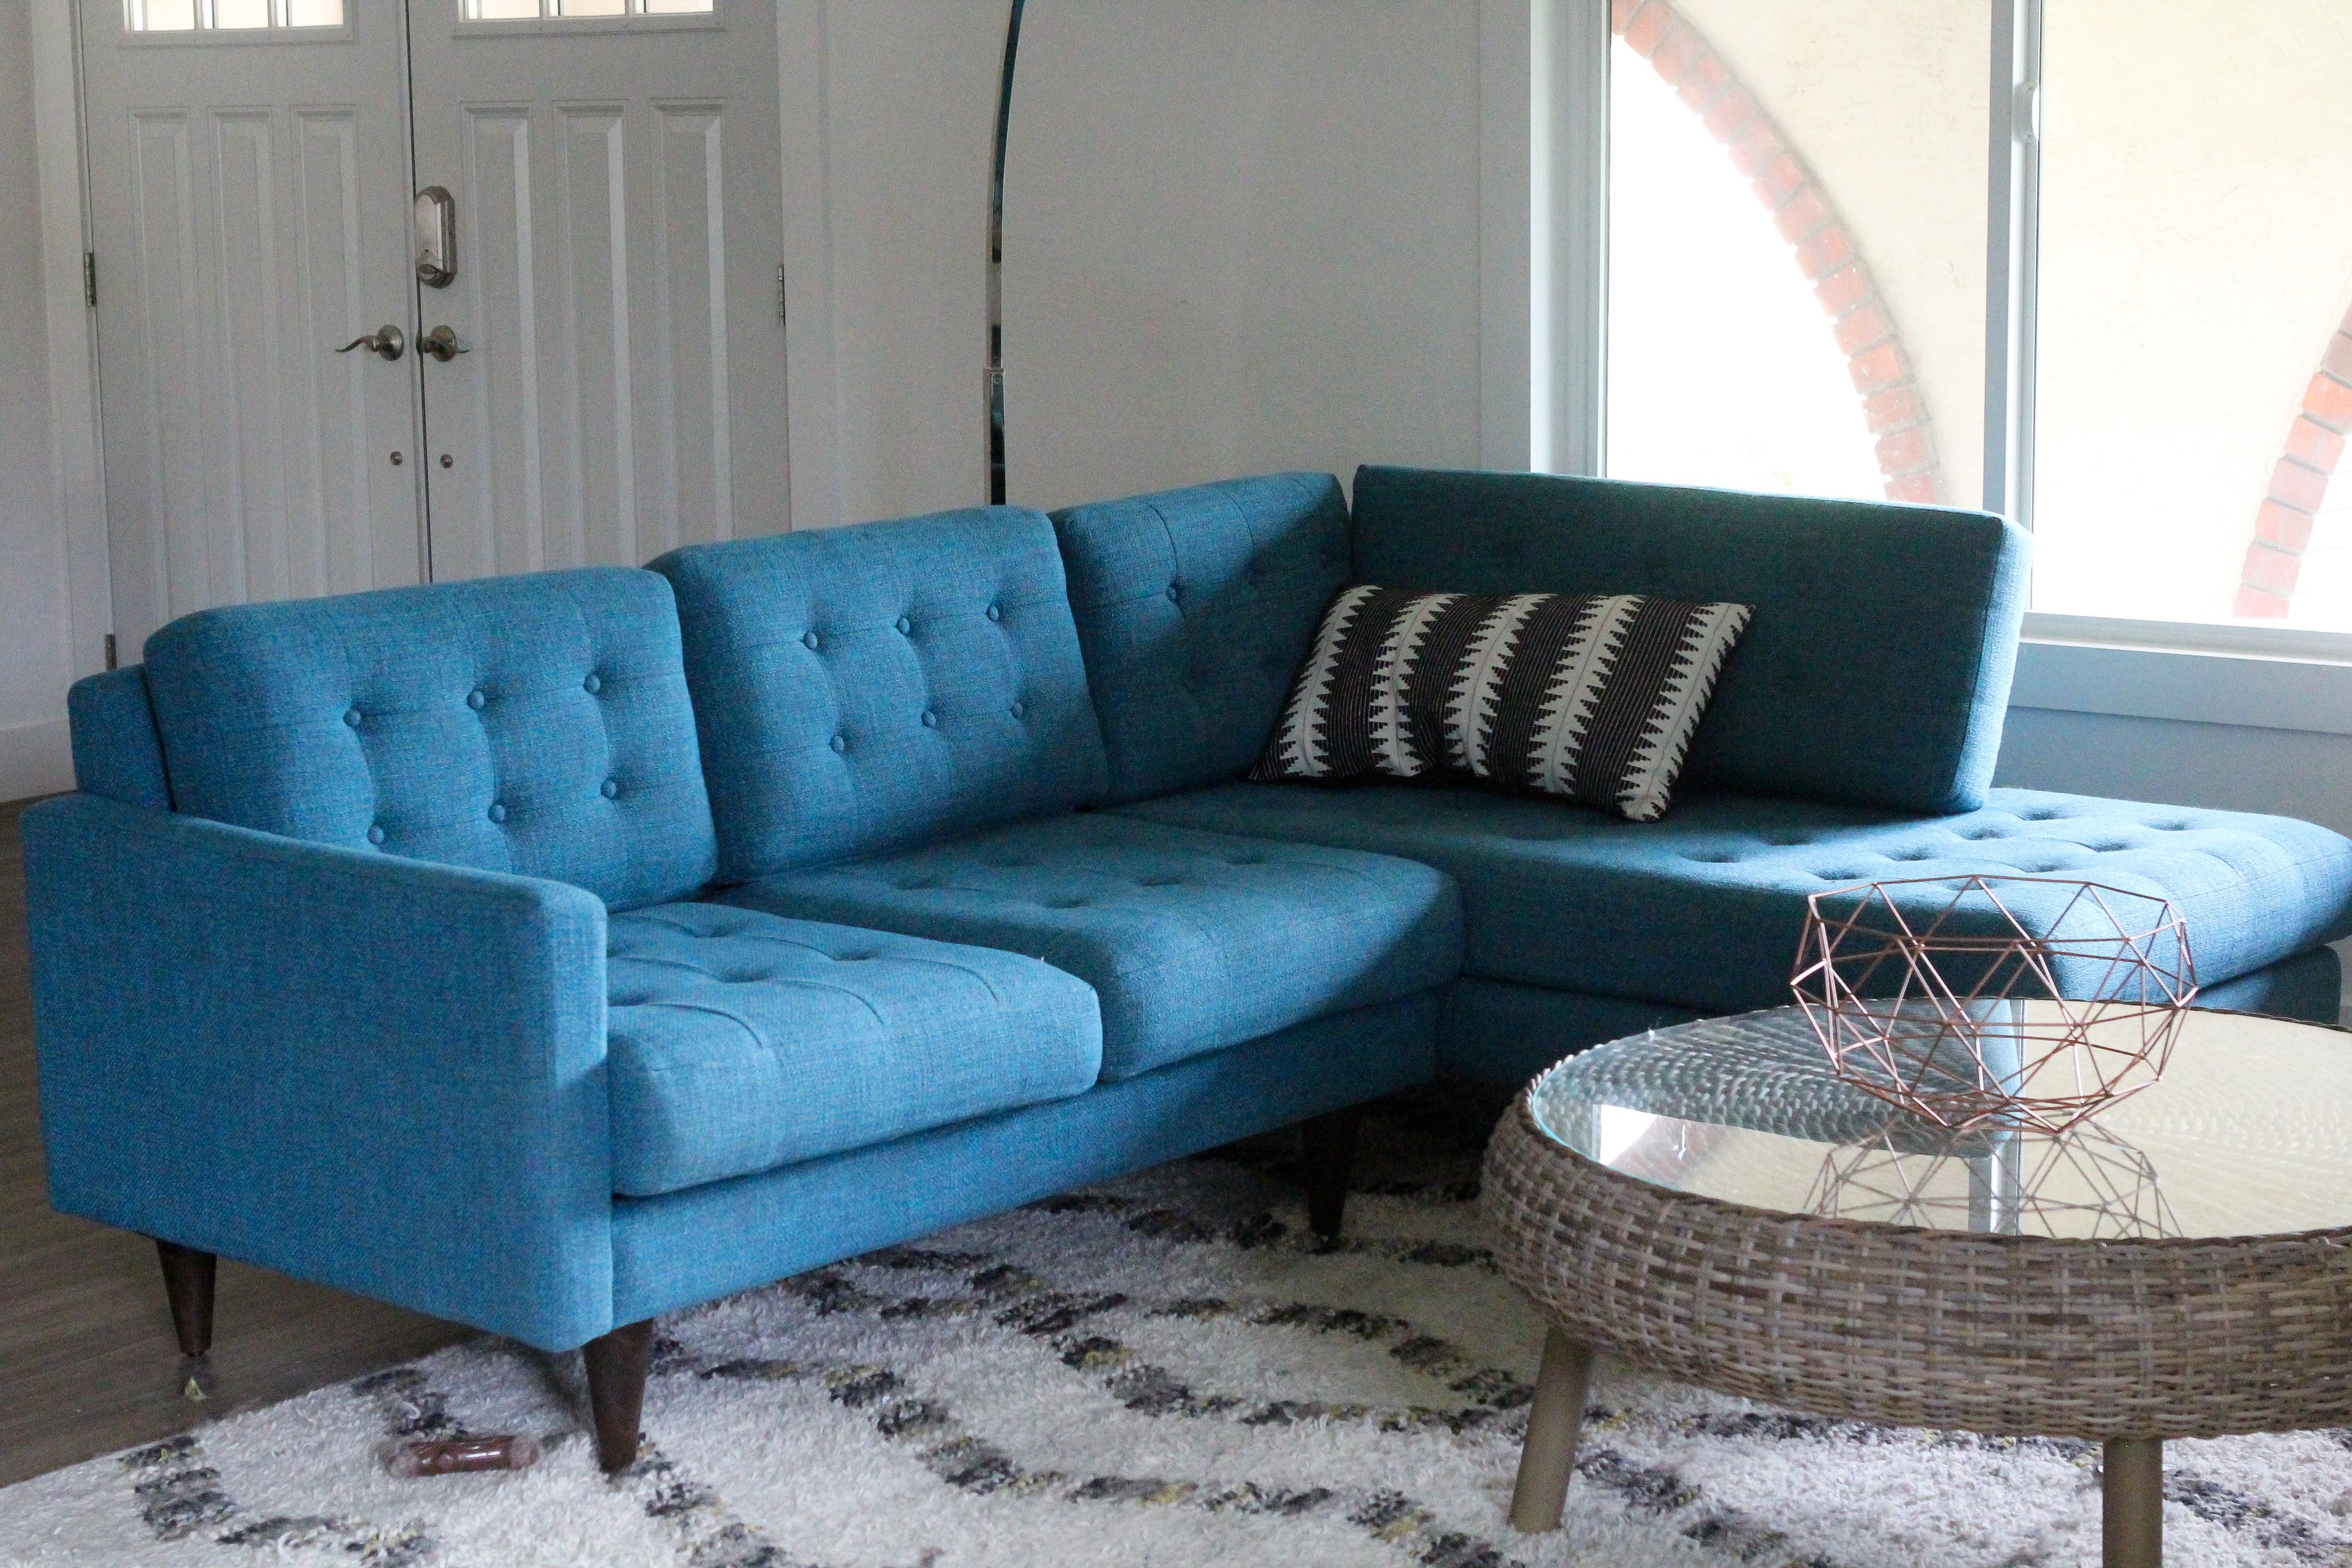 A modern living room featuring a blue, tufted sectional sofa with an angled backrest. A decorative pillow with a geometric pattern is placed on the sofa. A round wicker coffee table with a geometric wire decor item is on a light and dark patterned rug.